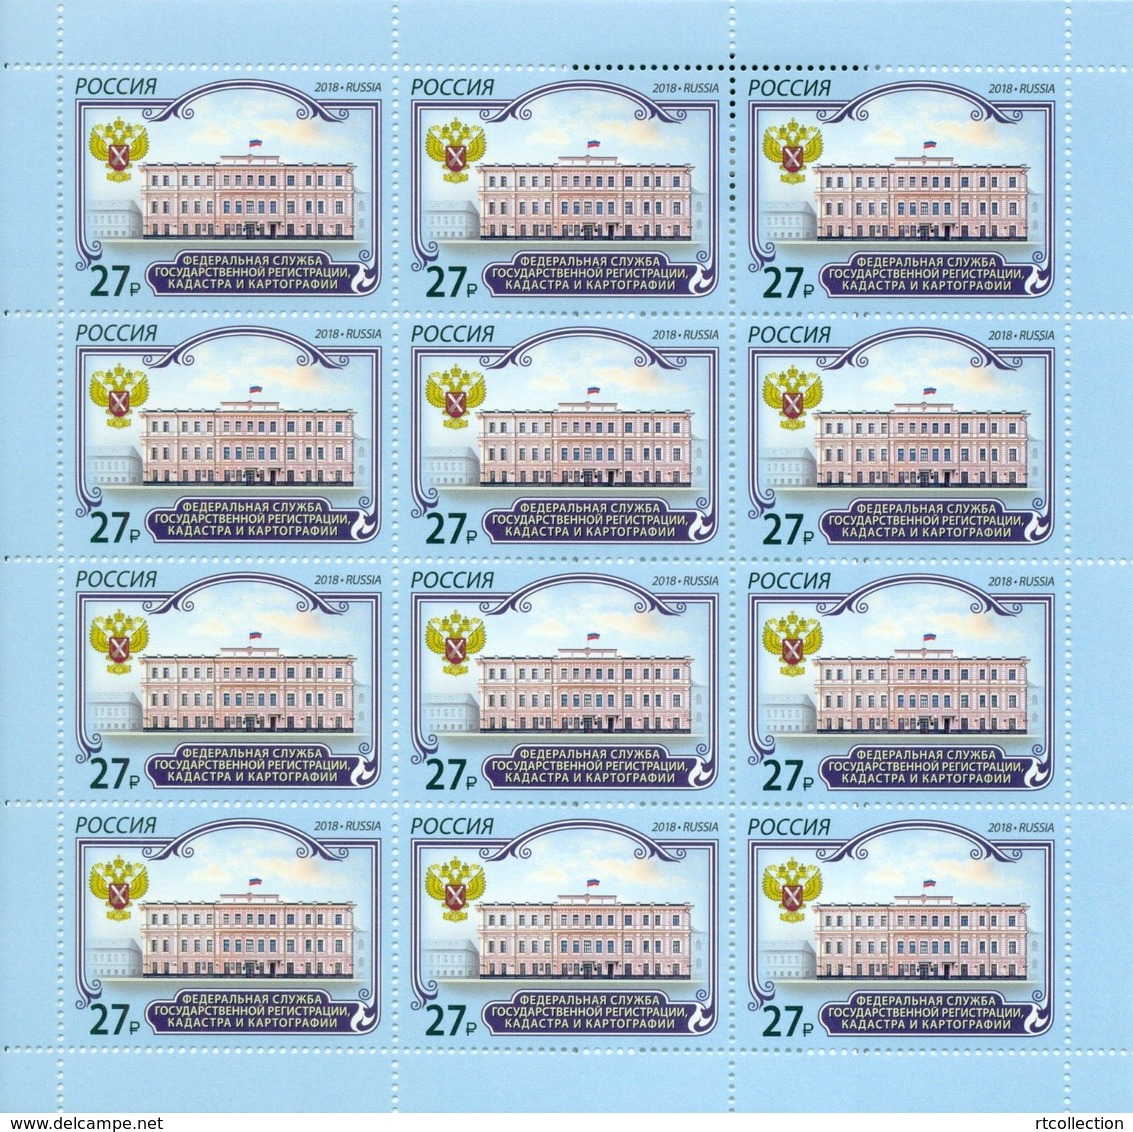 Russia 2018 Sheet Federal Service Of State Registration Cadastre Cartography Place Architecture Organizations Stamps MNH - Full Sheets